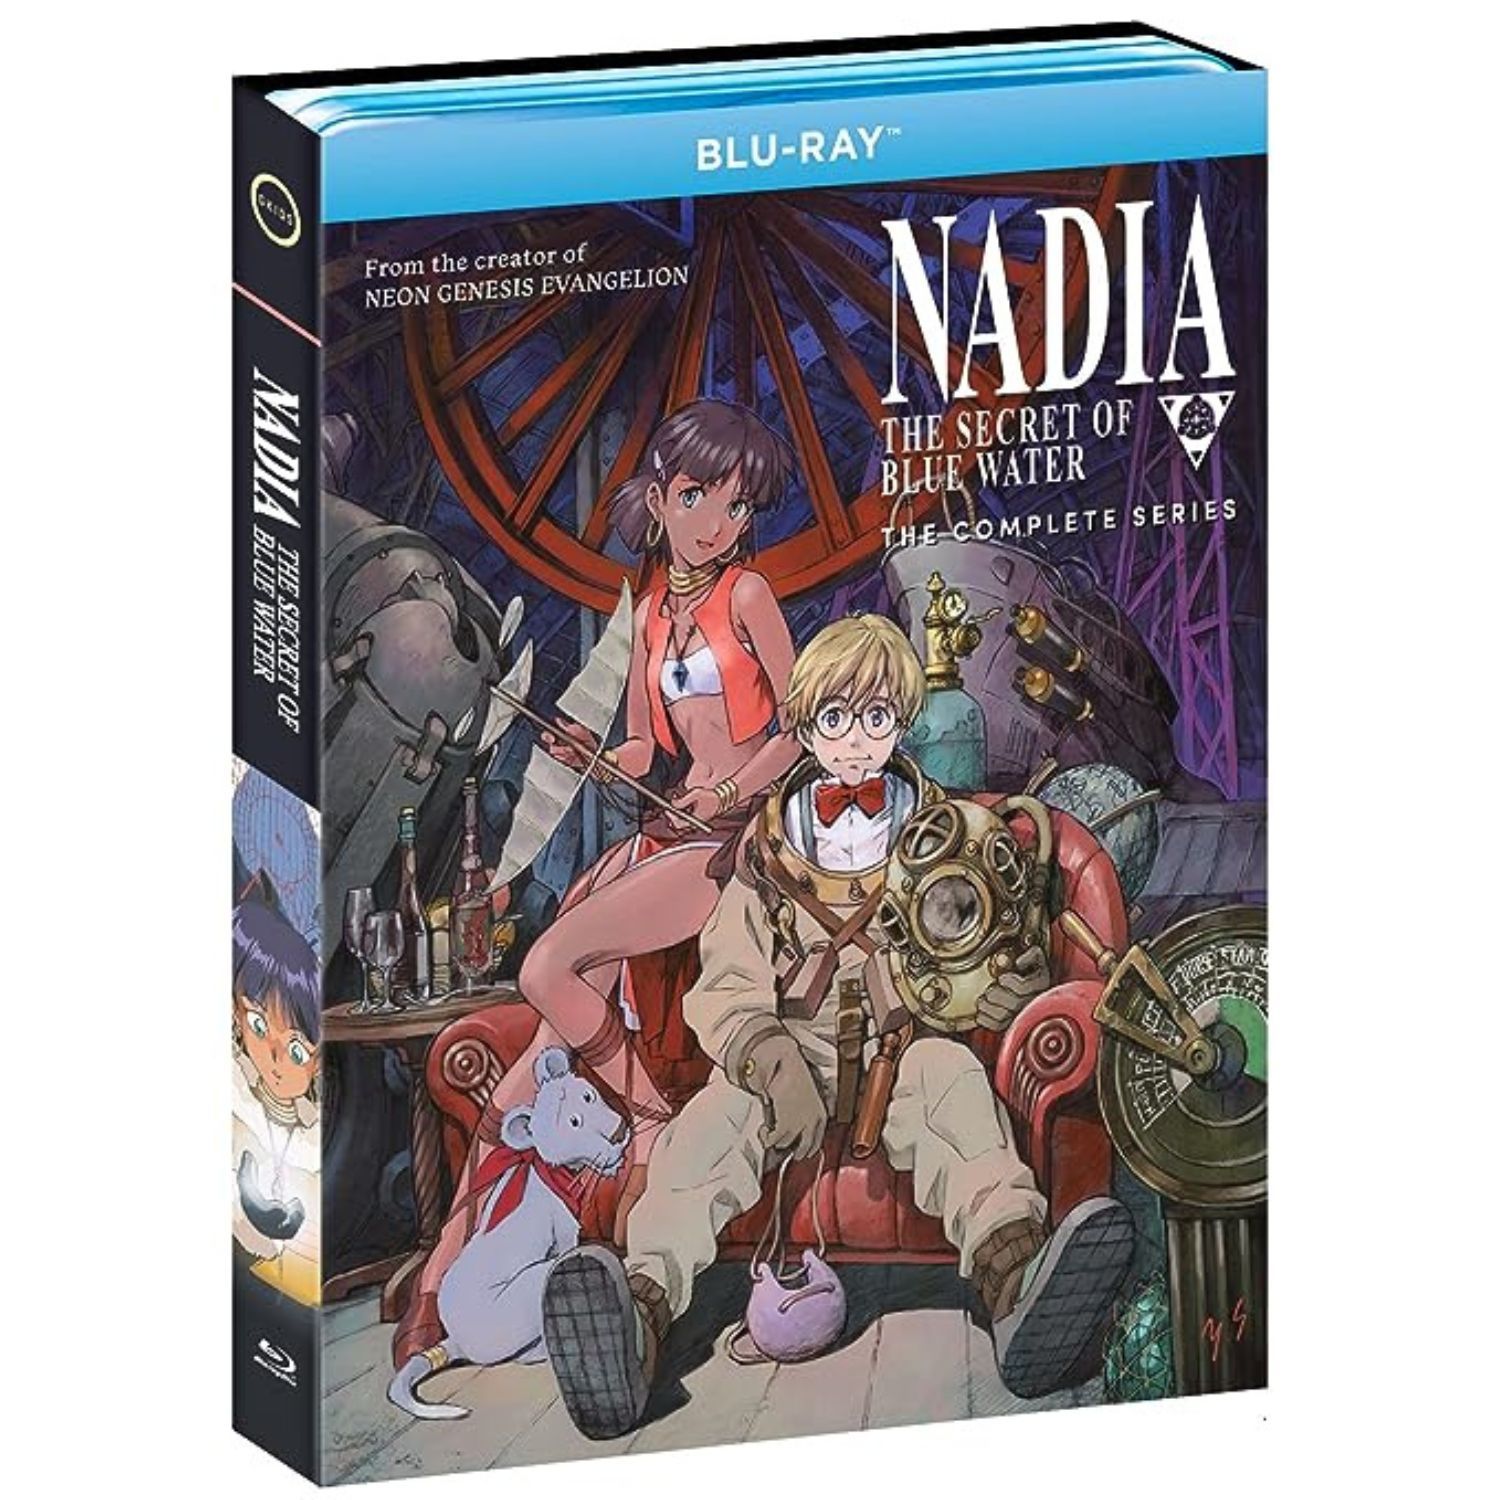 Nadia: The Secret of Blue Water Blu-ray collection